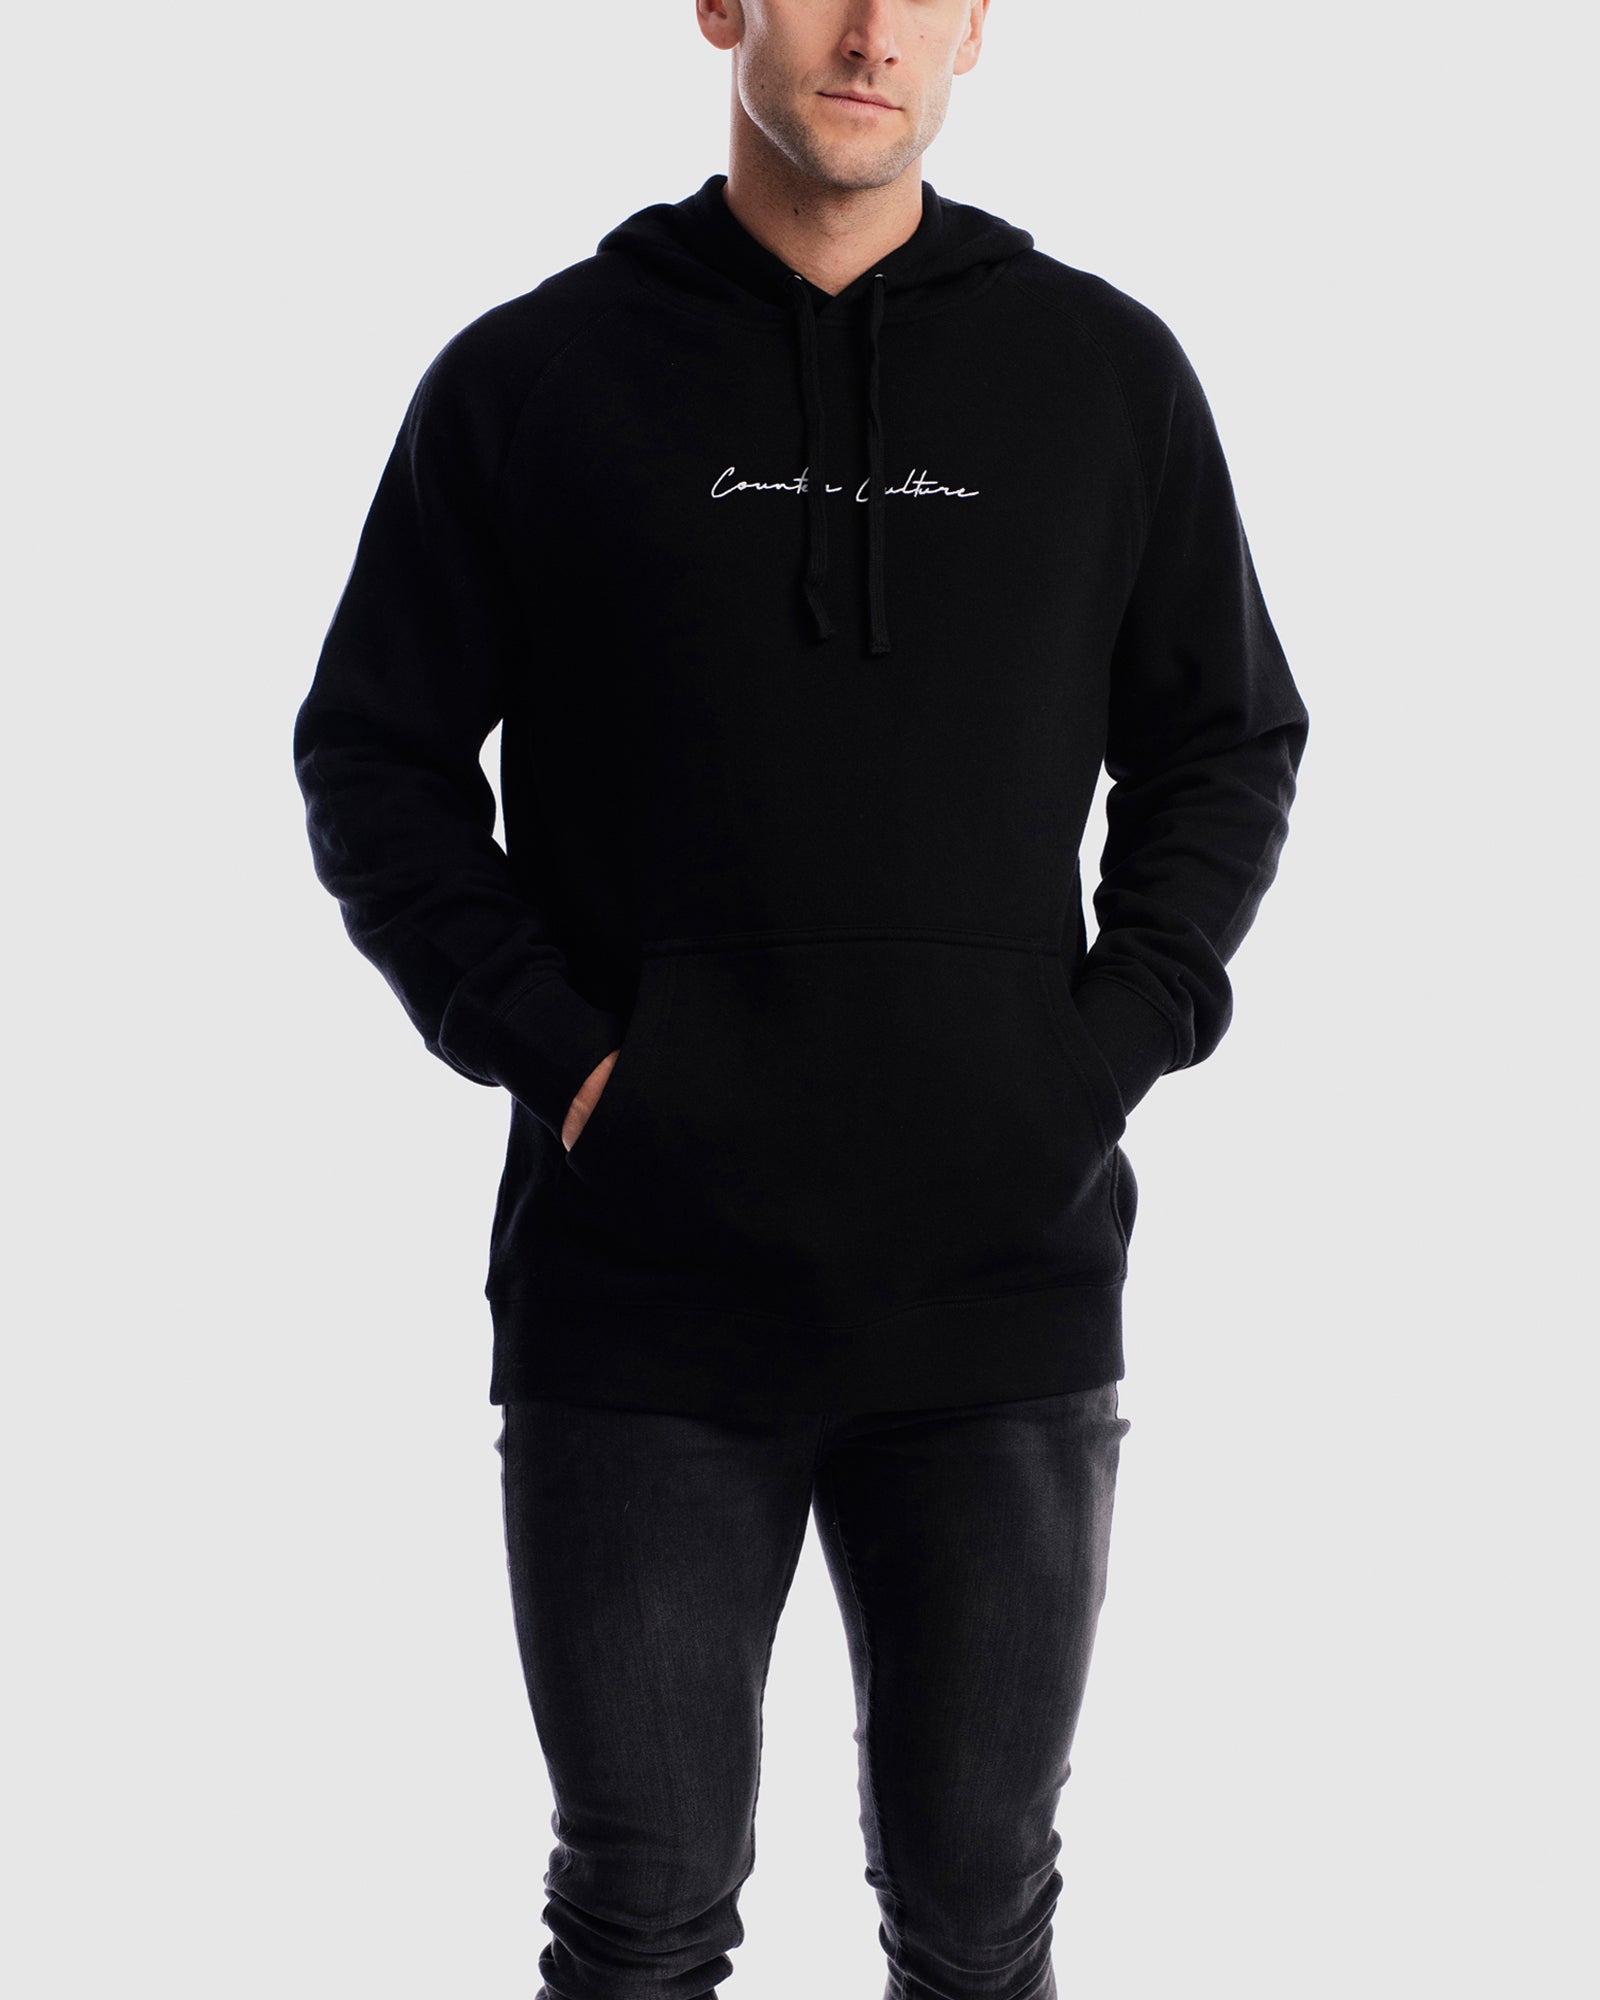 Autograph Embroidery Hoodie